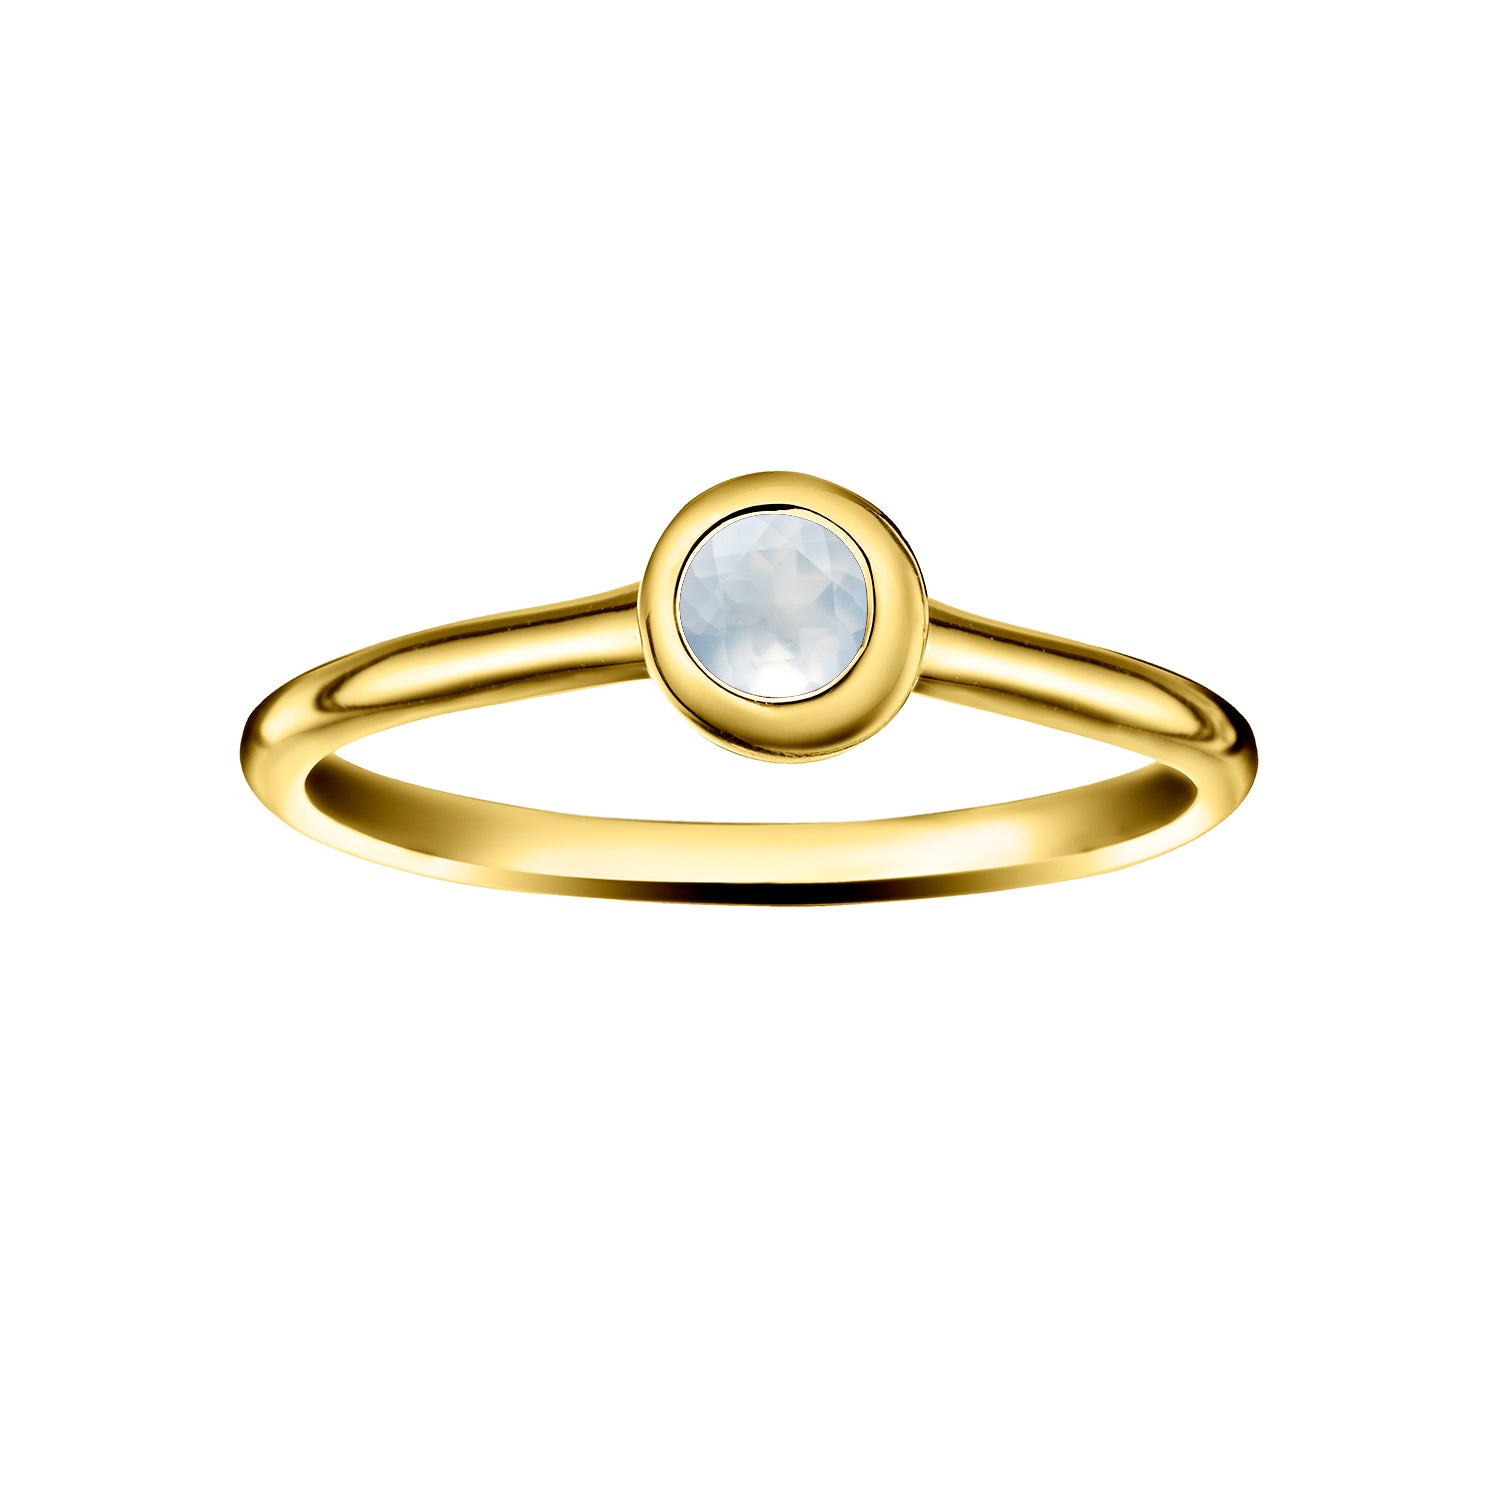 Polished Gold Vermeil Crescent Moon Stacking Birthstone Rings - June / Moonstone